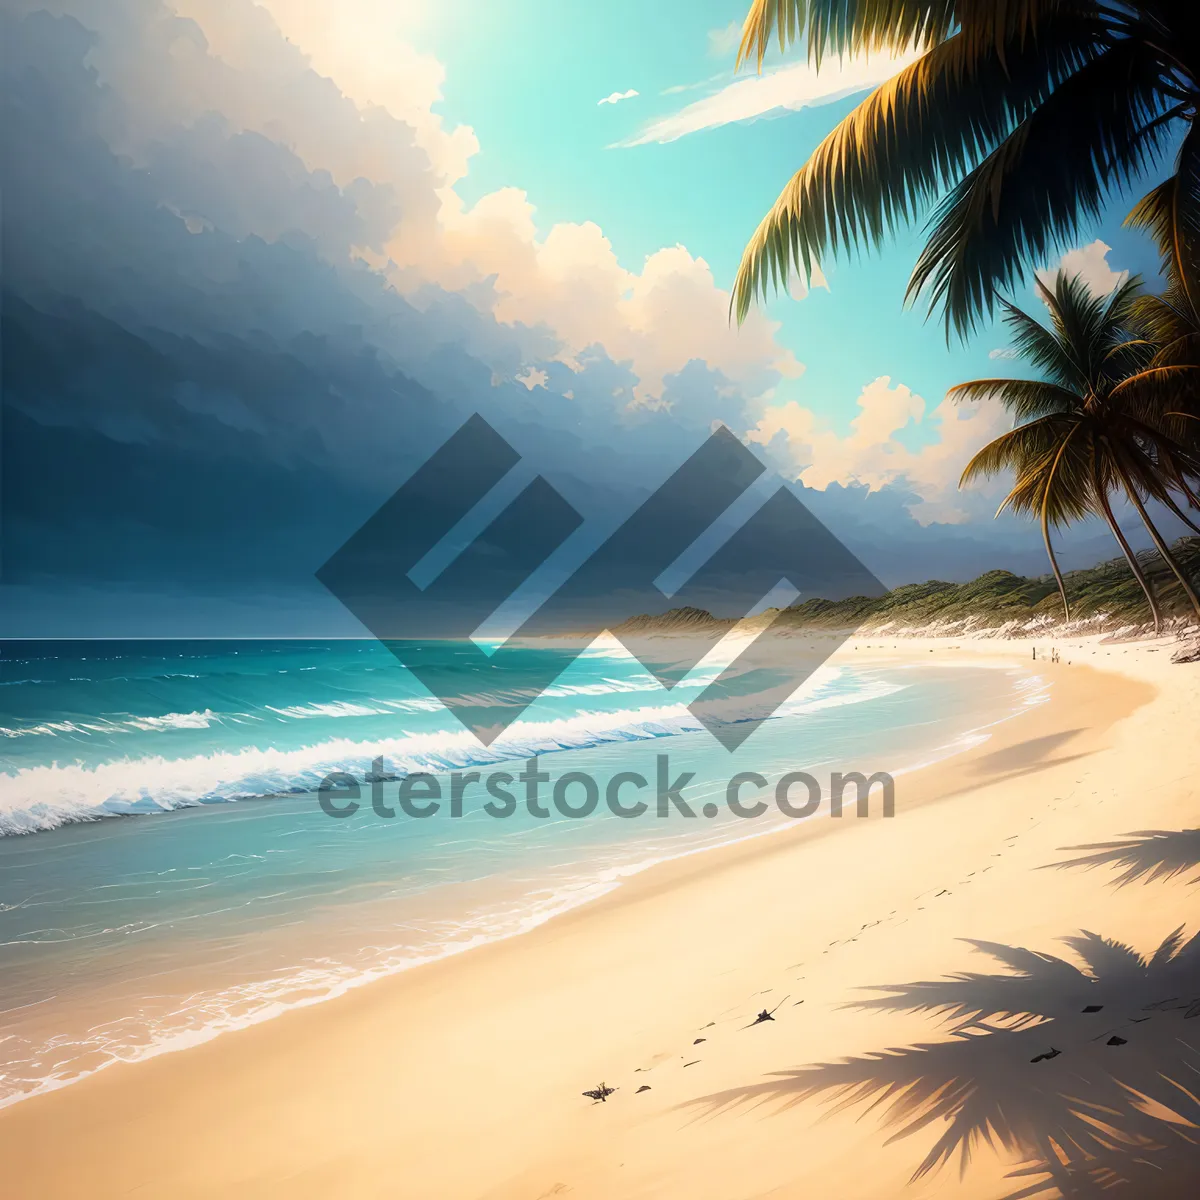 Picture of Relaxing beach paradise with turquoise waters and palm trees